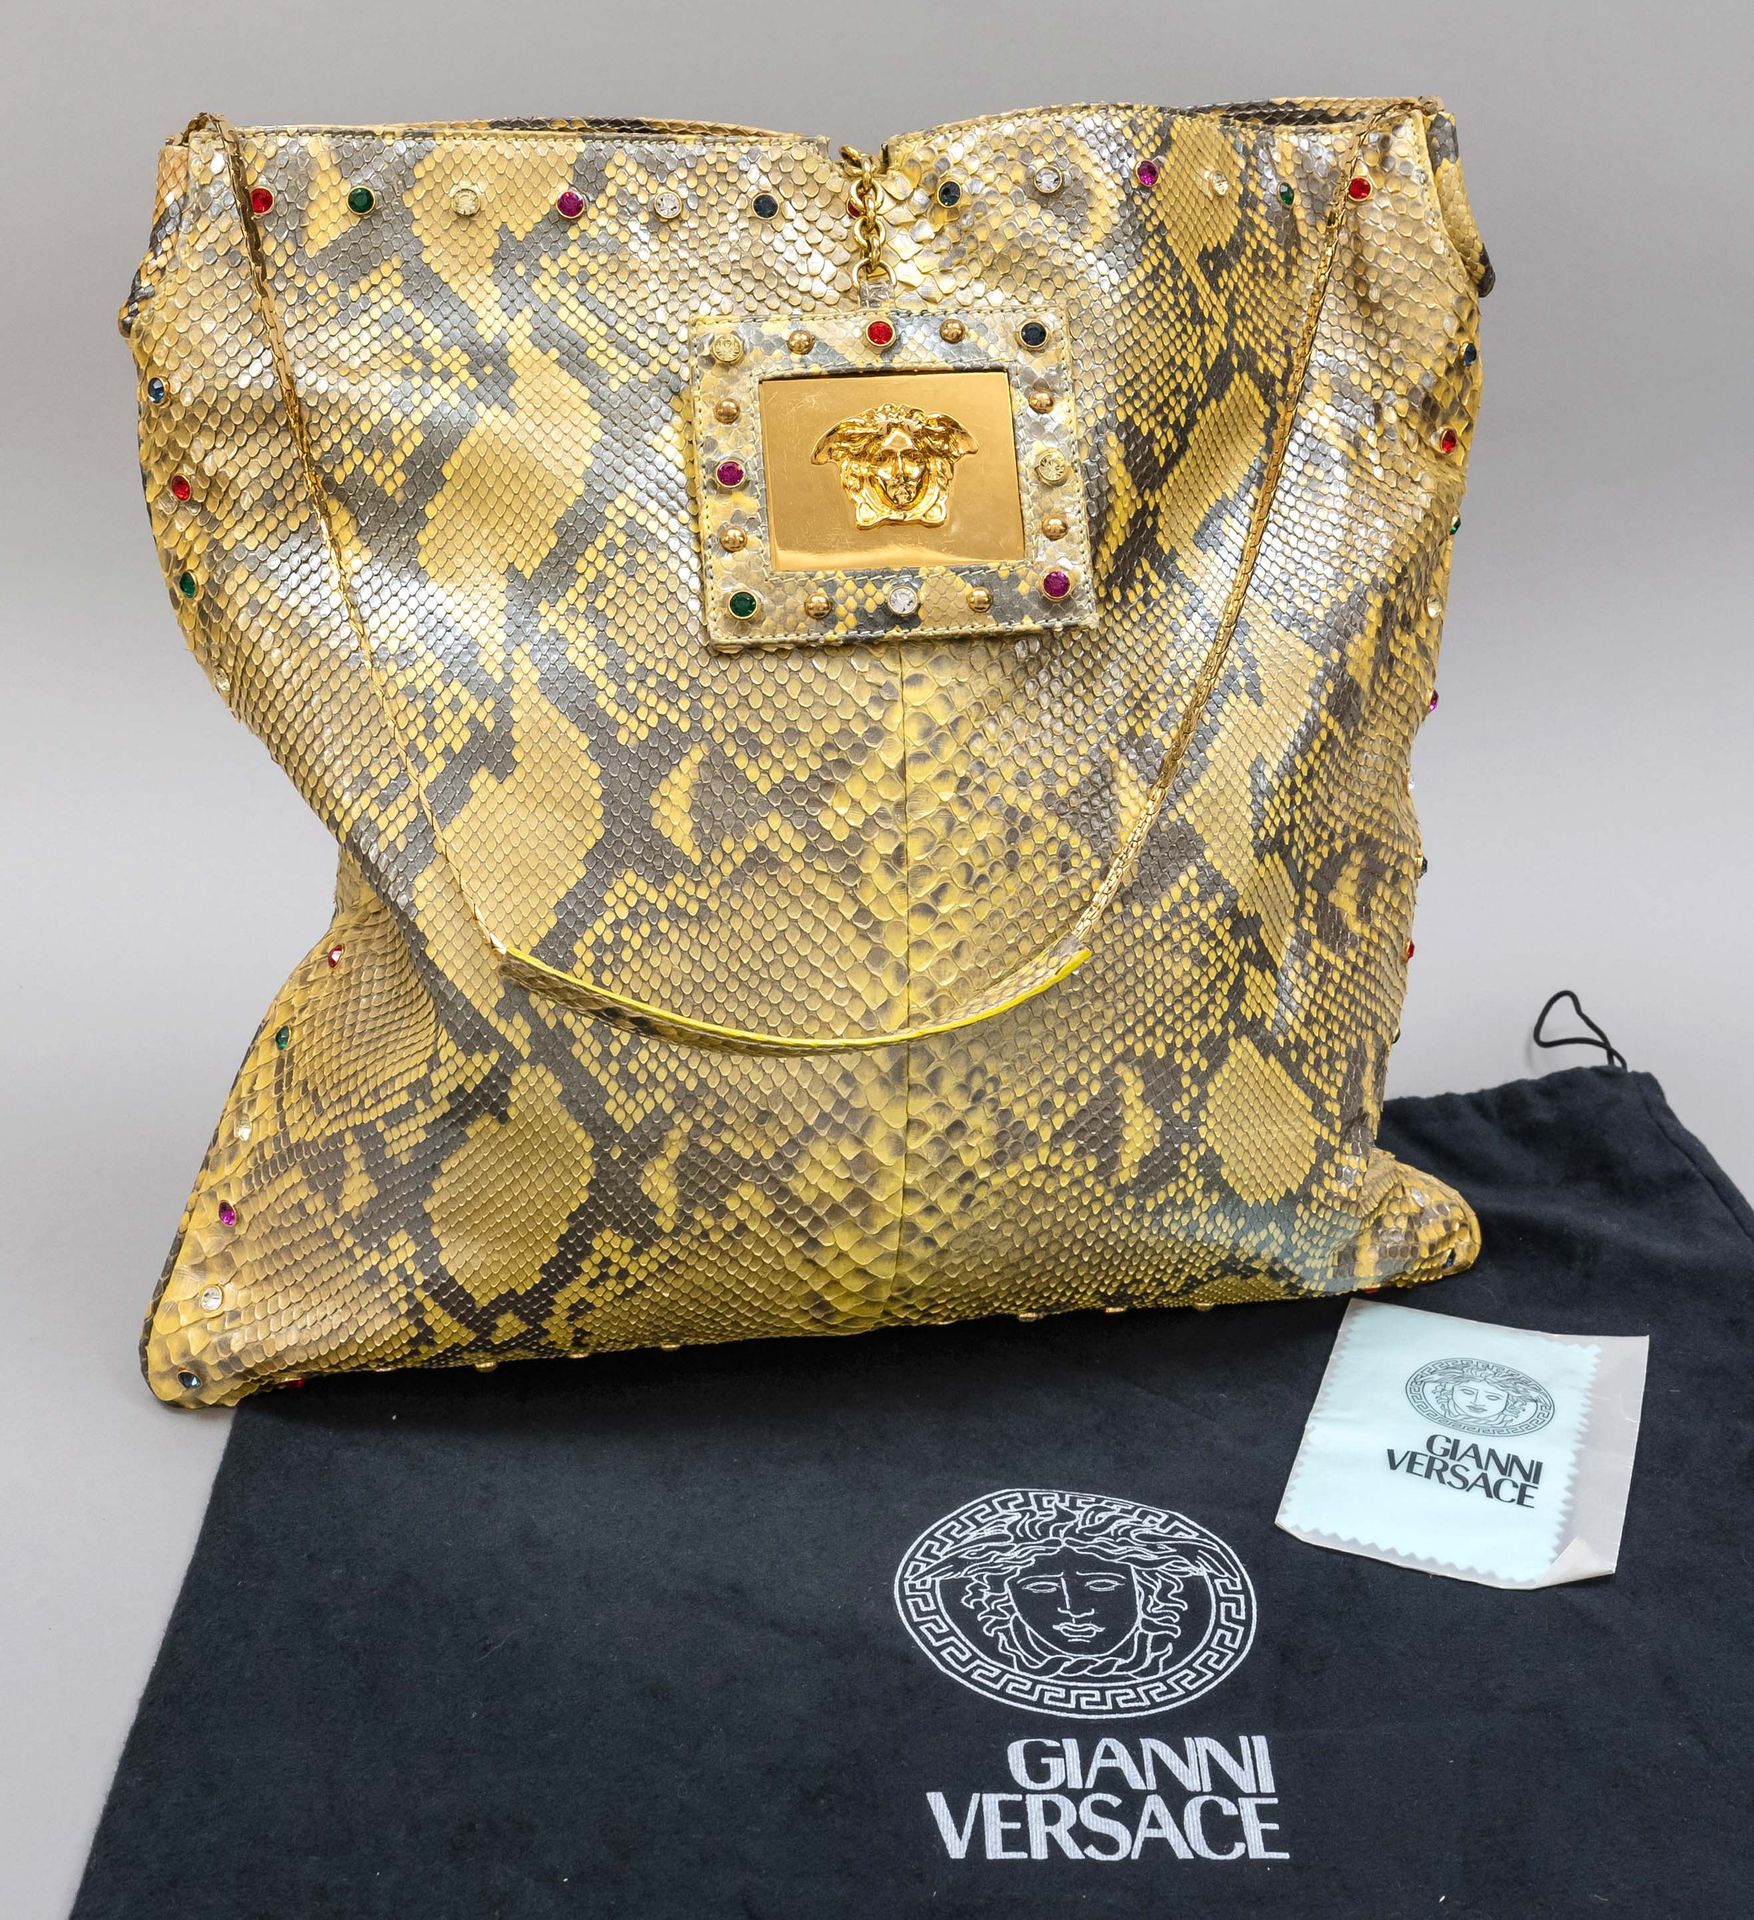 Null Versace, Gold Python Flat Tote Bag, dyed python leather in iridescent yello&hellip;